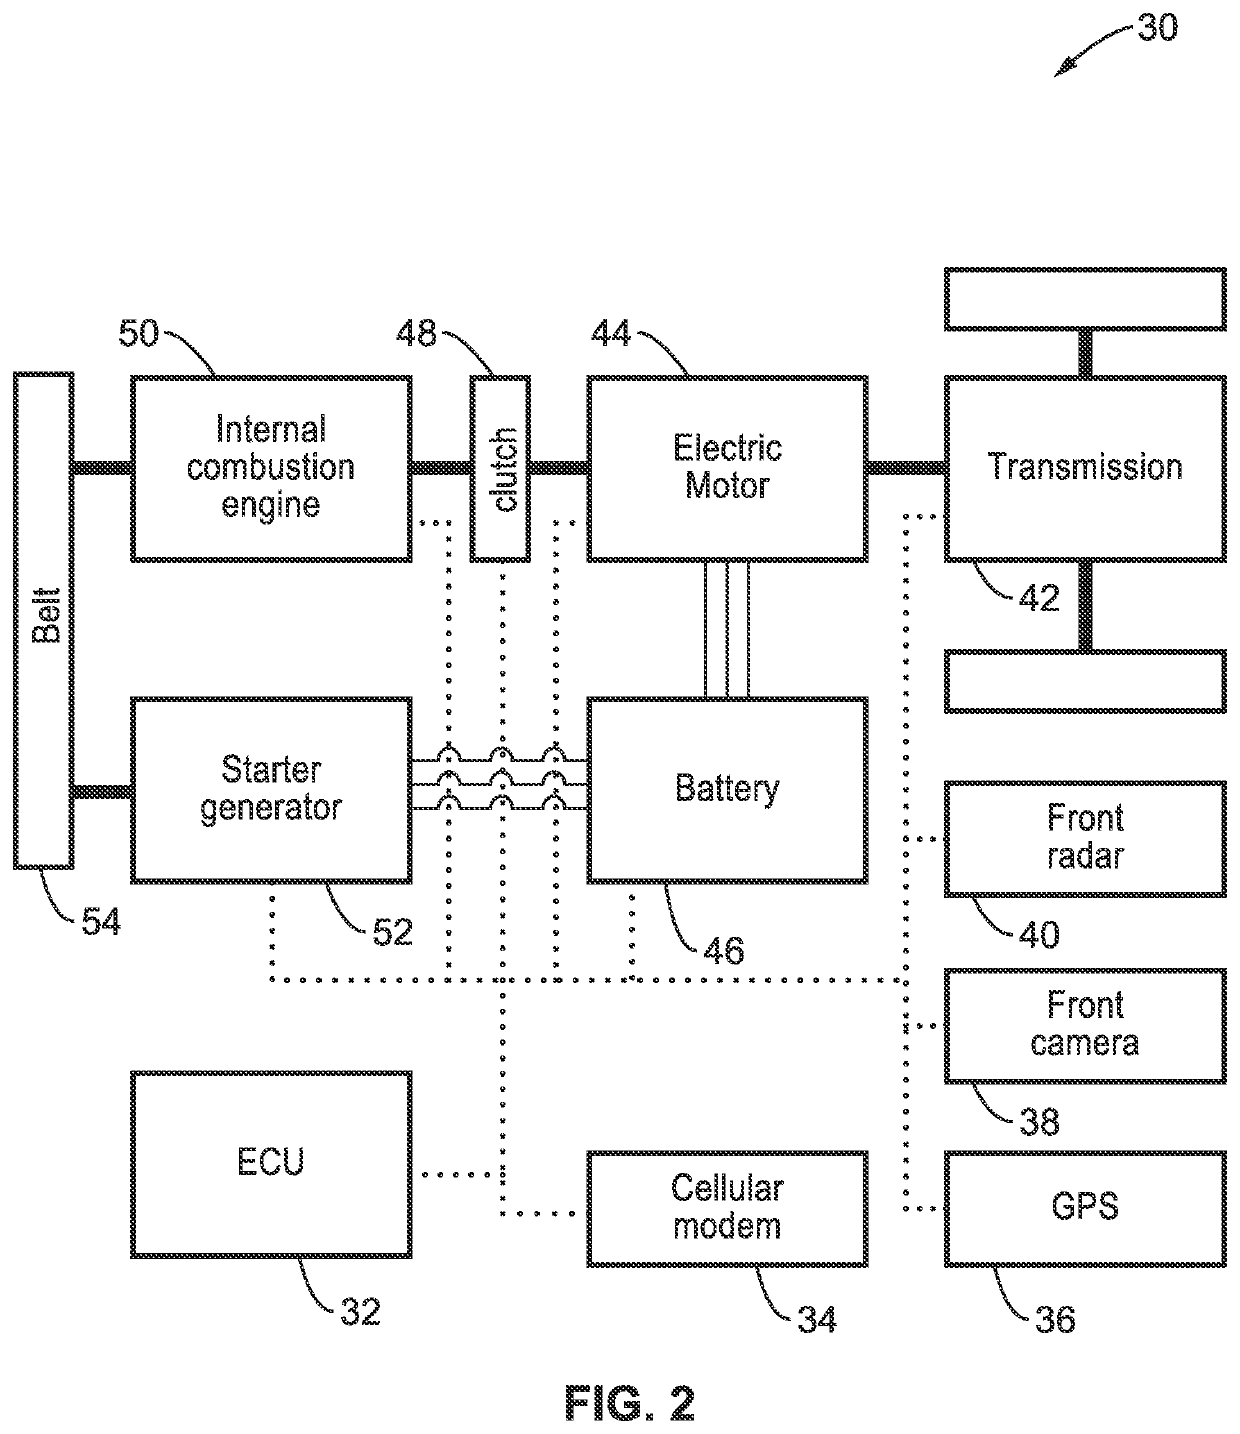 Systems, apparatus and methods to improve plug-in hybrid electric vehicle energy performance by using v2c connectivity